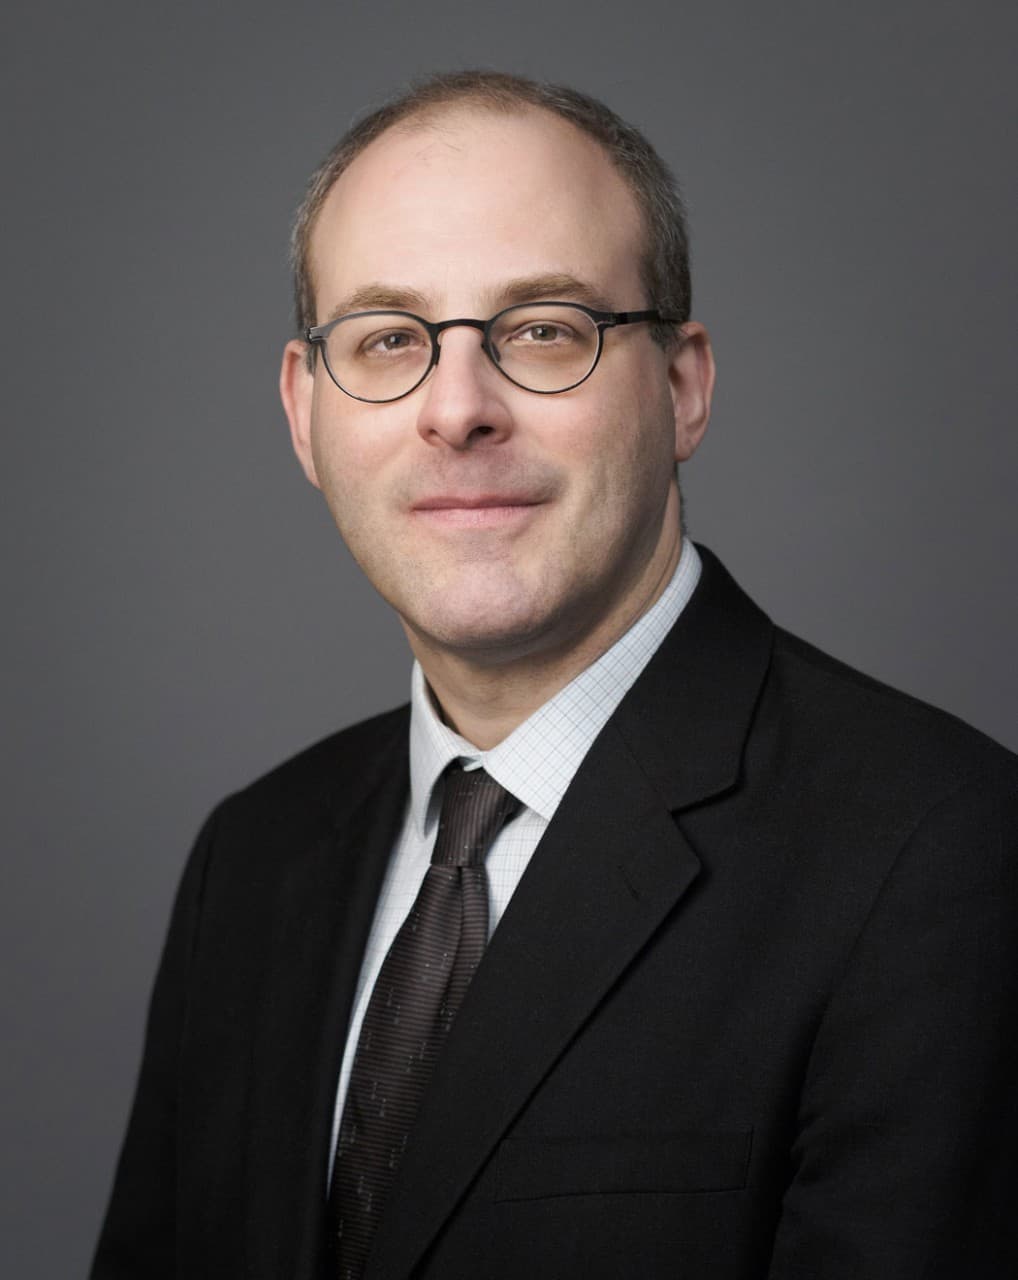 Benjamin Weiss, the new chair of the Museum of Fine Arts' Prints, Drawings and Photographs Department. (Museum of Fine Arts)